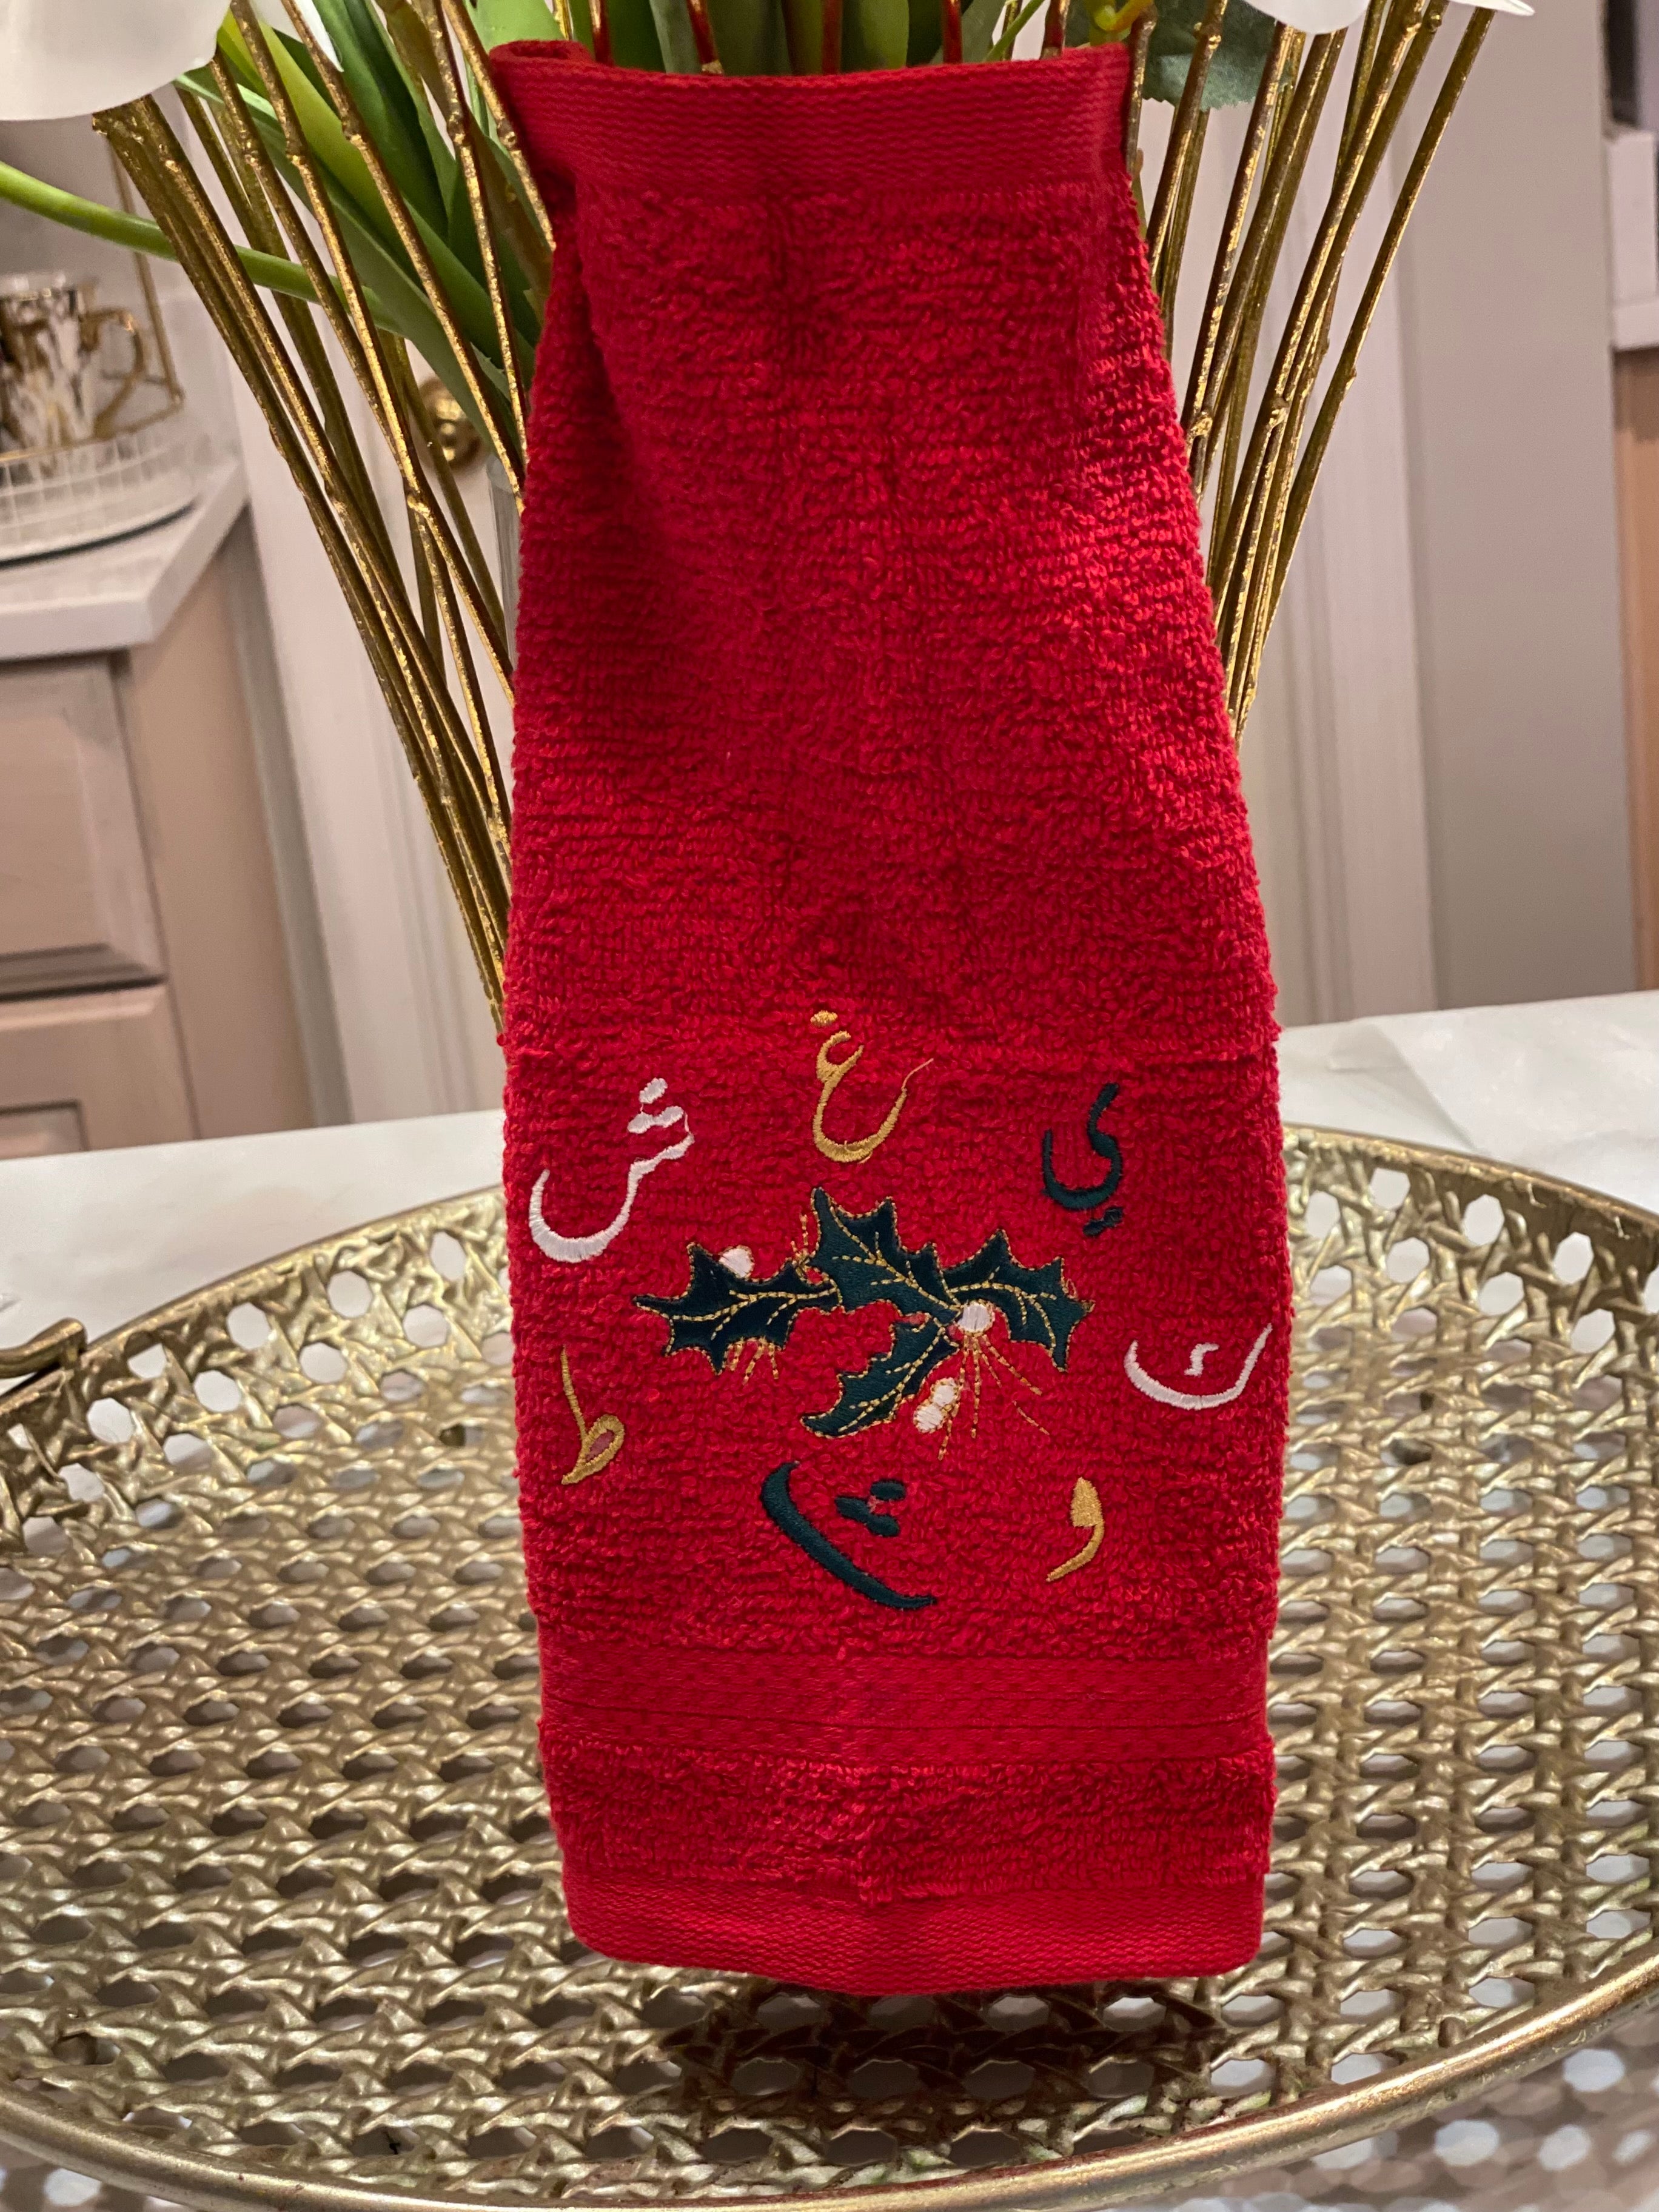 Red Christmas Towel Mistletoe design with Arabic Calligraphy